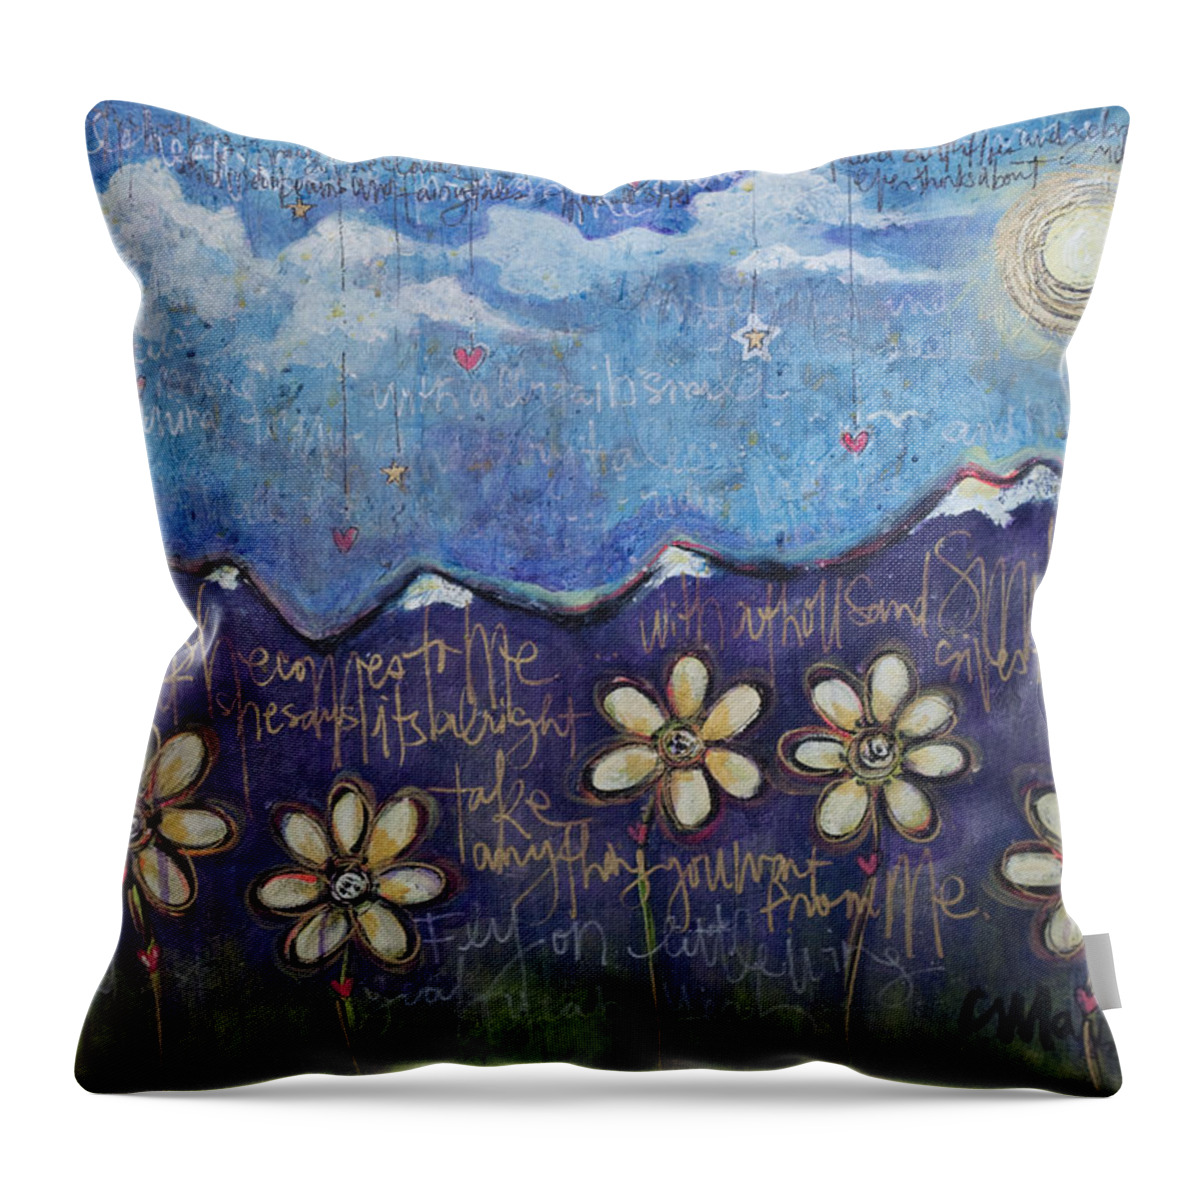 Little Wing Throw Pillow featuring the painting Fly On My Love by Laurie Maves ART